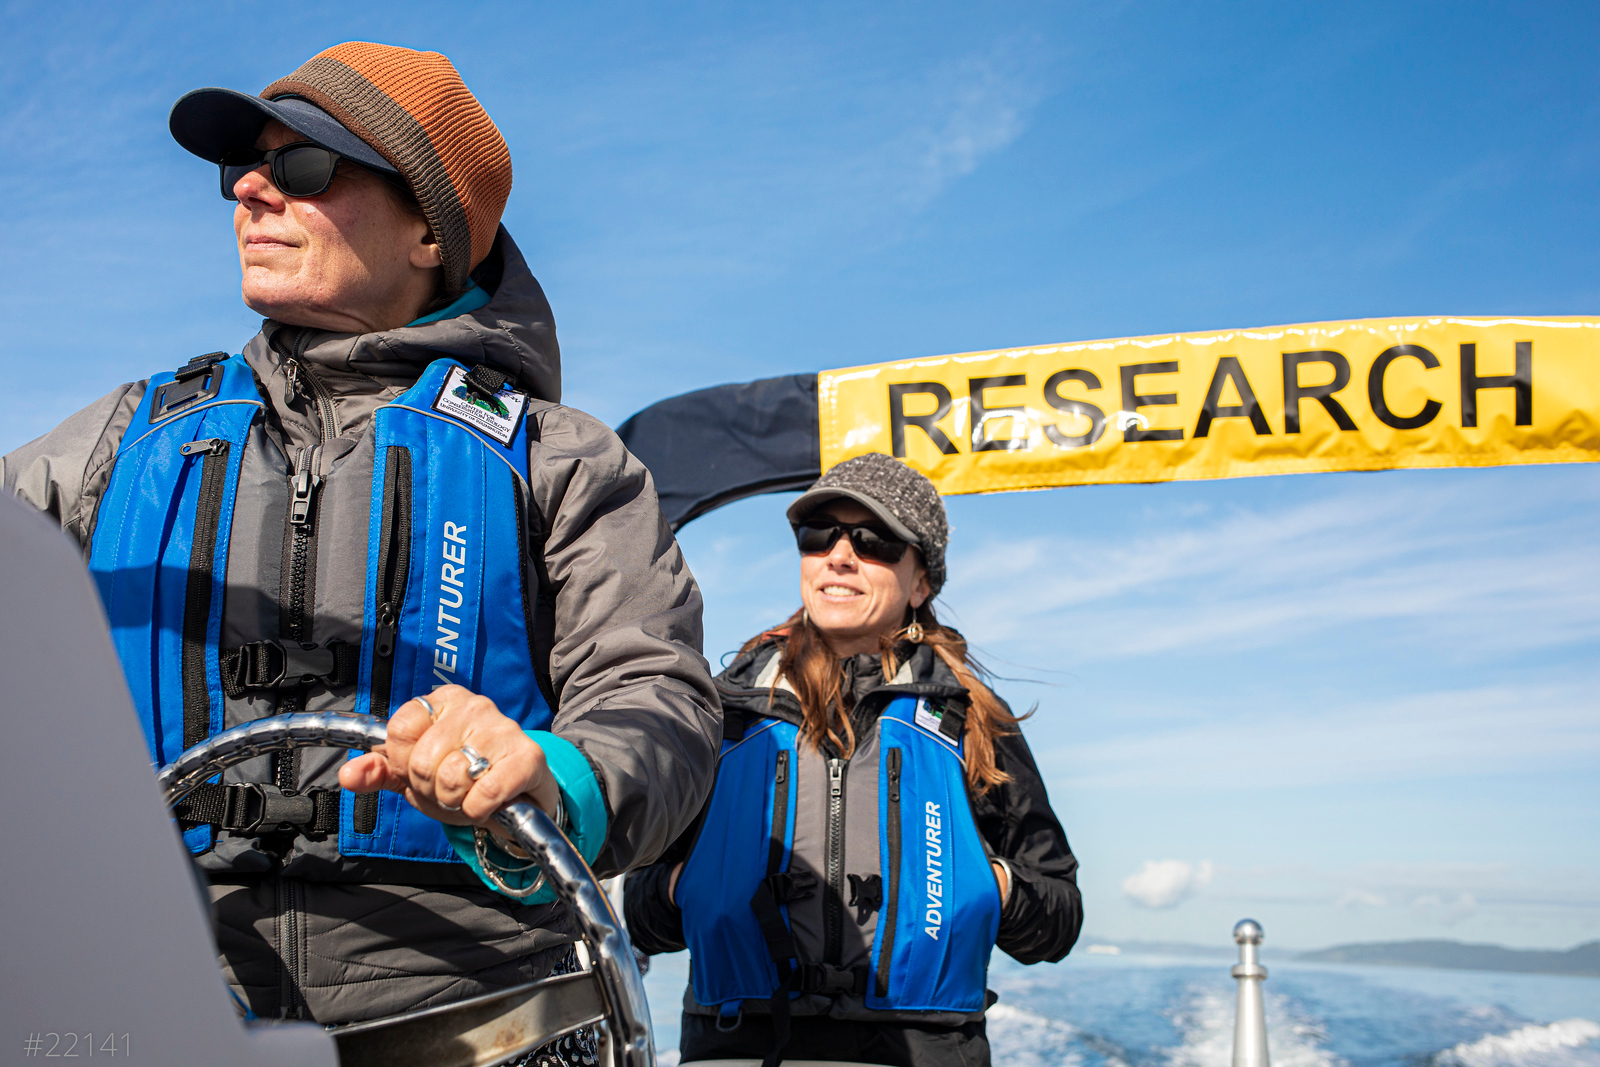 Two women on a boat with a large sign labeled "RESEARCH"